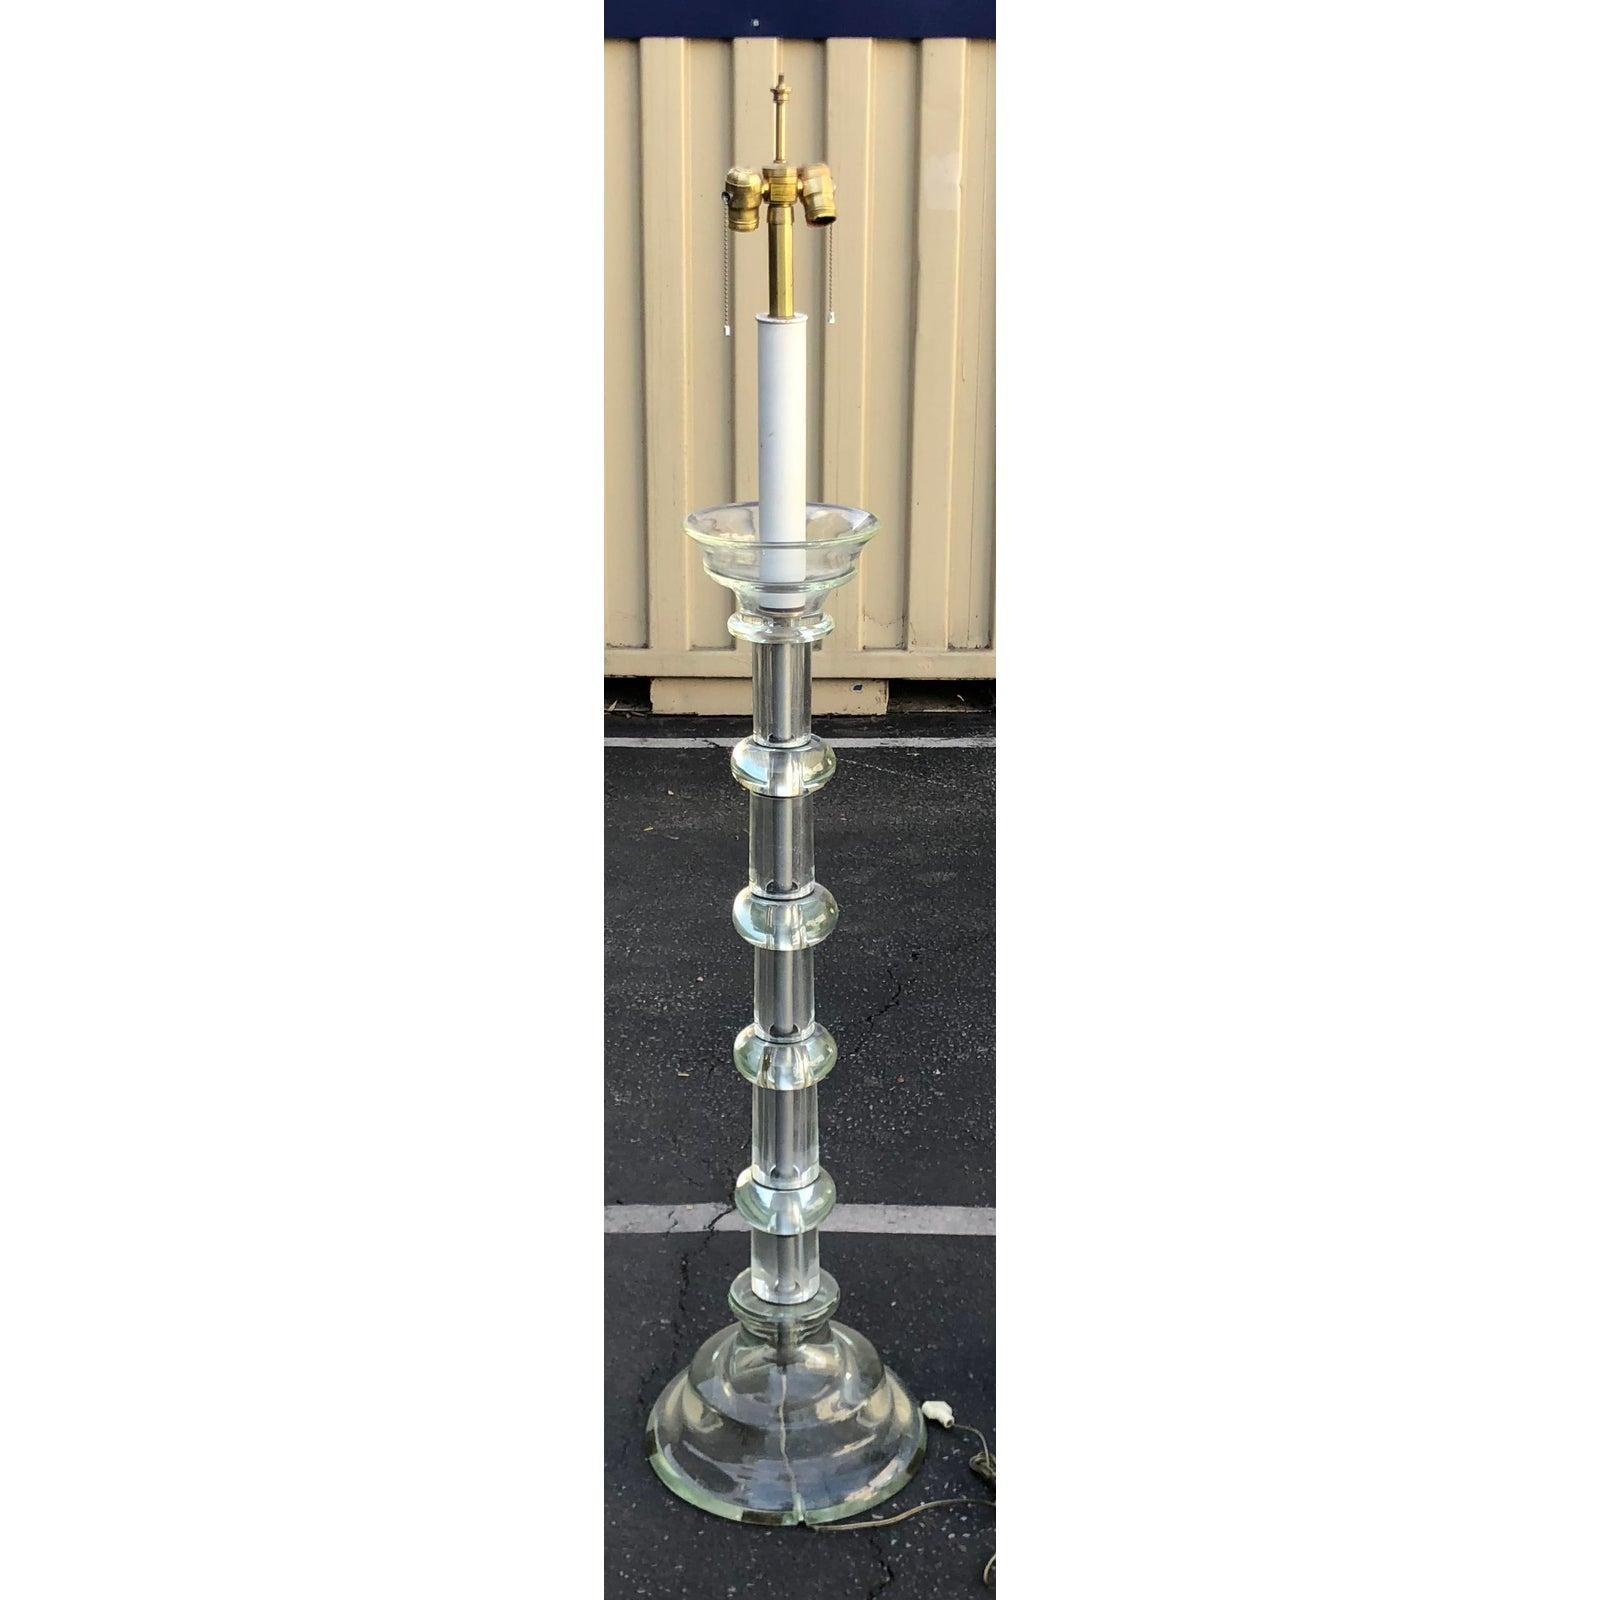 Rare vintage murano glass column floor lamp made by Seguso in Italy for Marbro. The base is made of sectioned murano glass with a modern neoclassical column form.